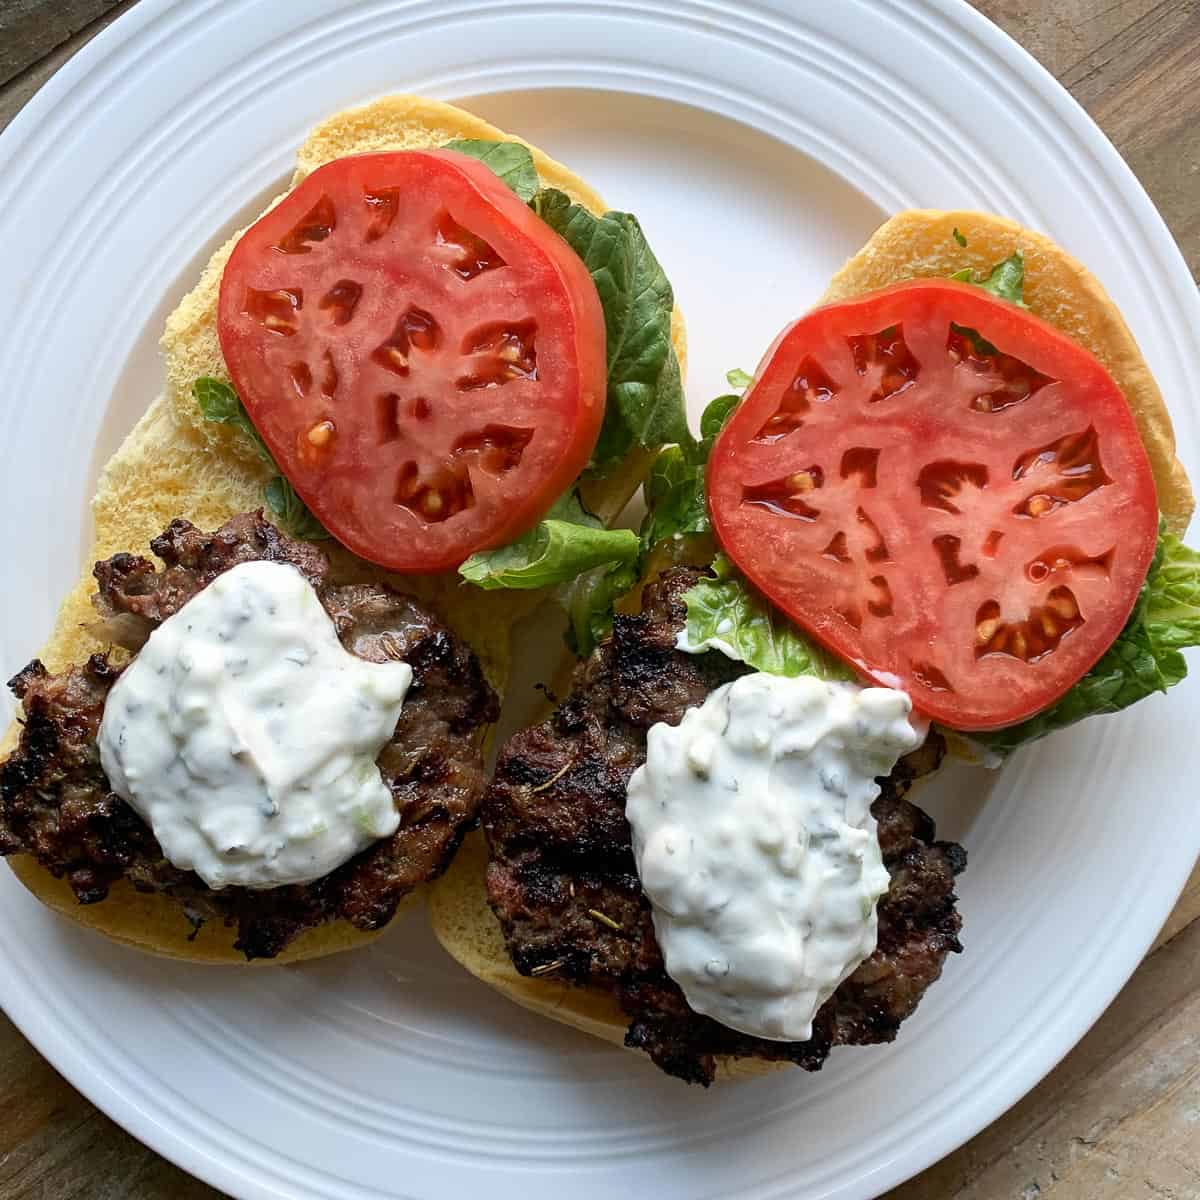 Two lamb patties on burger buns with tzatziki, tomato slices and lettuce.